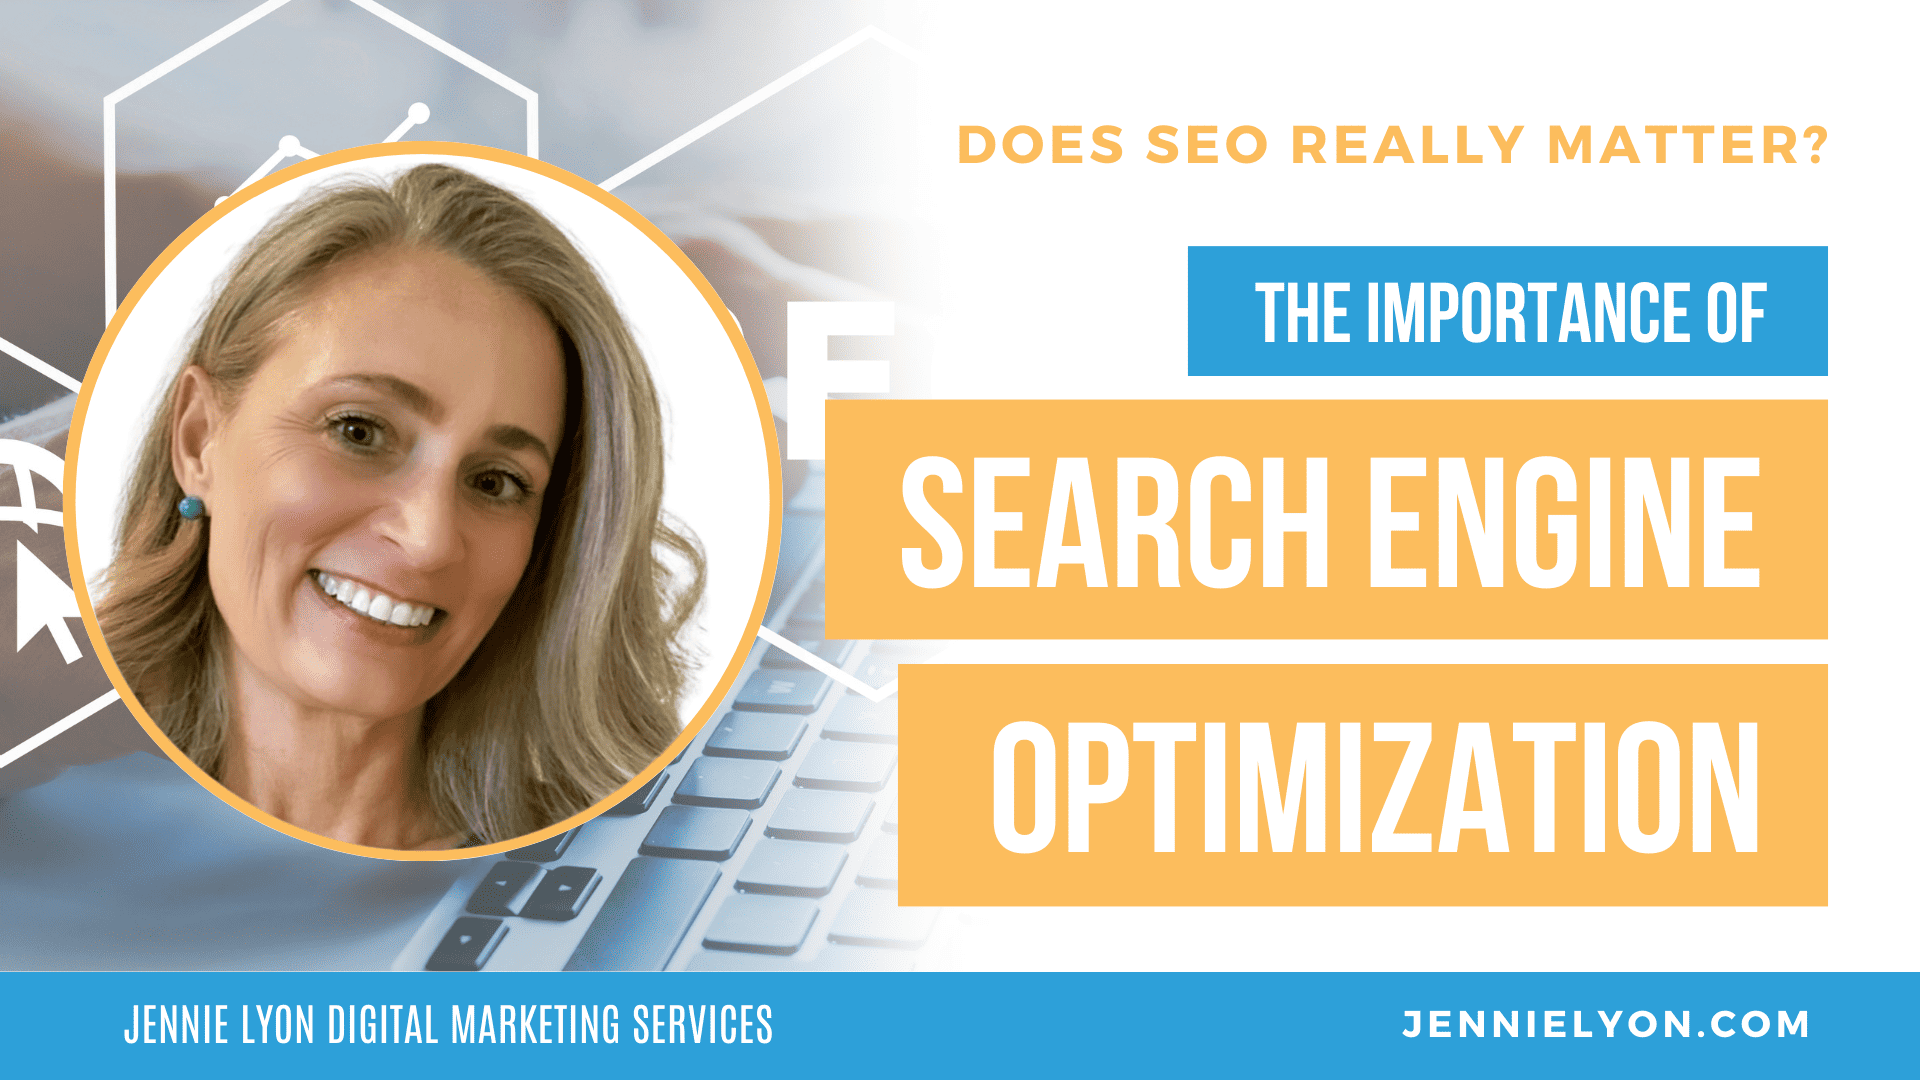 Does SEO Really Matter? The Importance of Search Engine Optimization